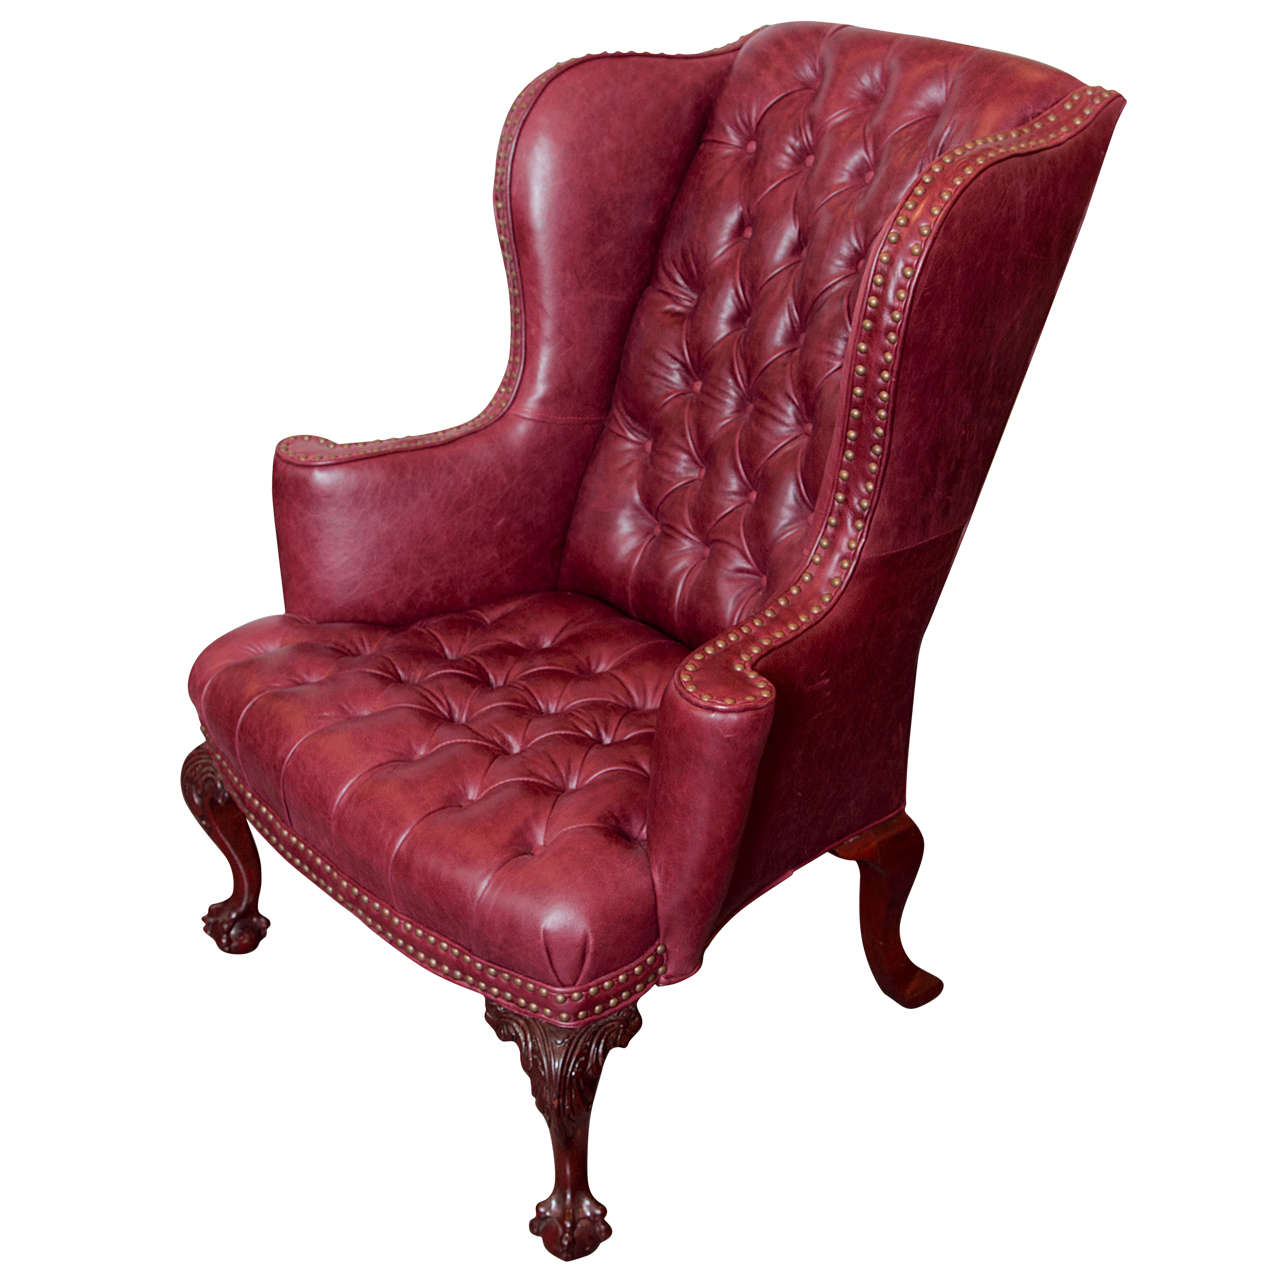 19th Century English Tufted Leather Chippendale Wing Chair